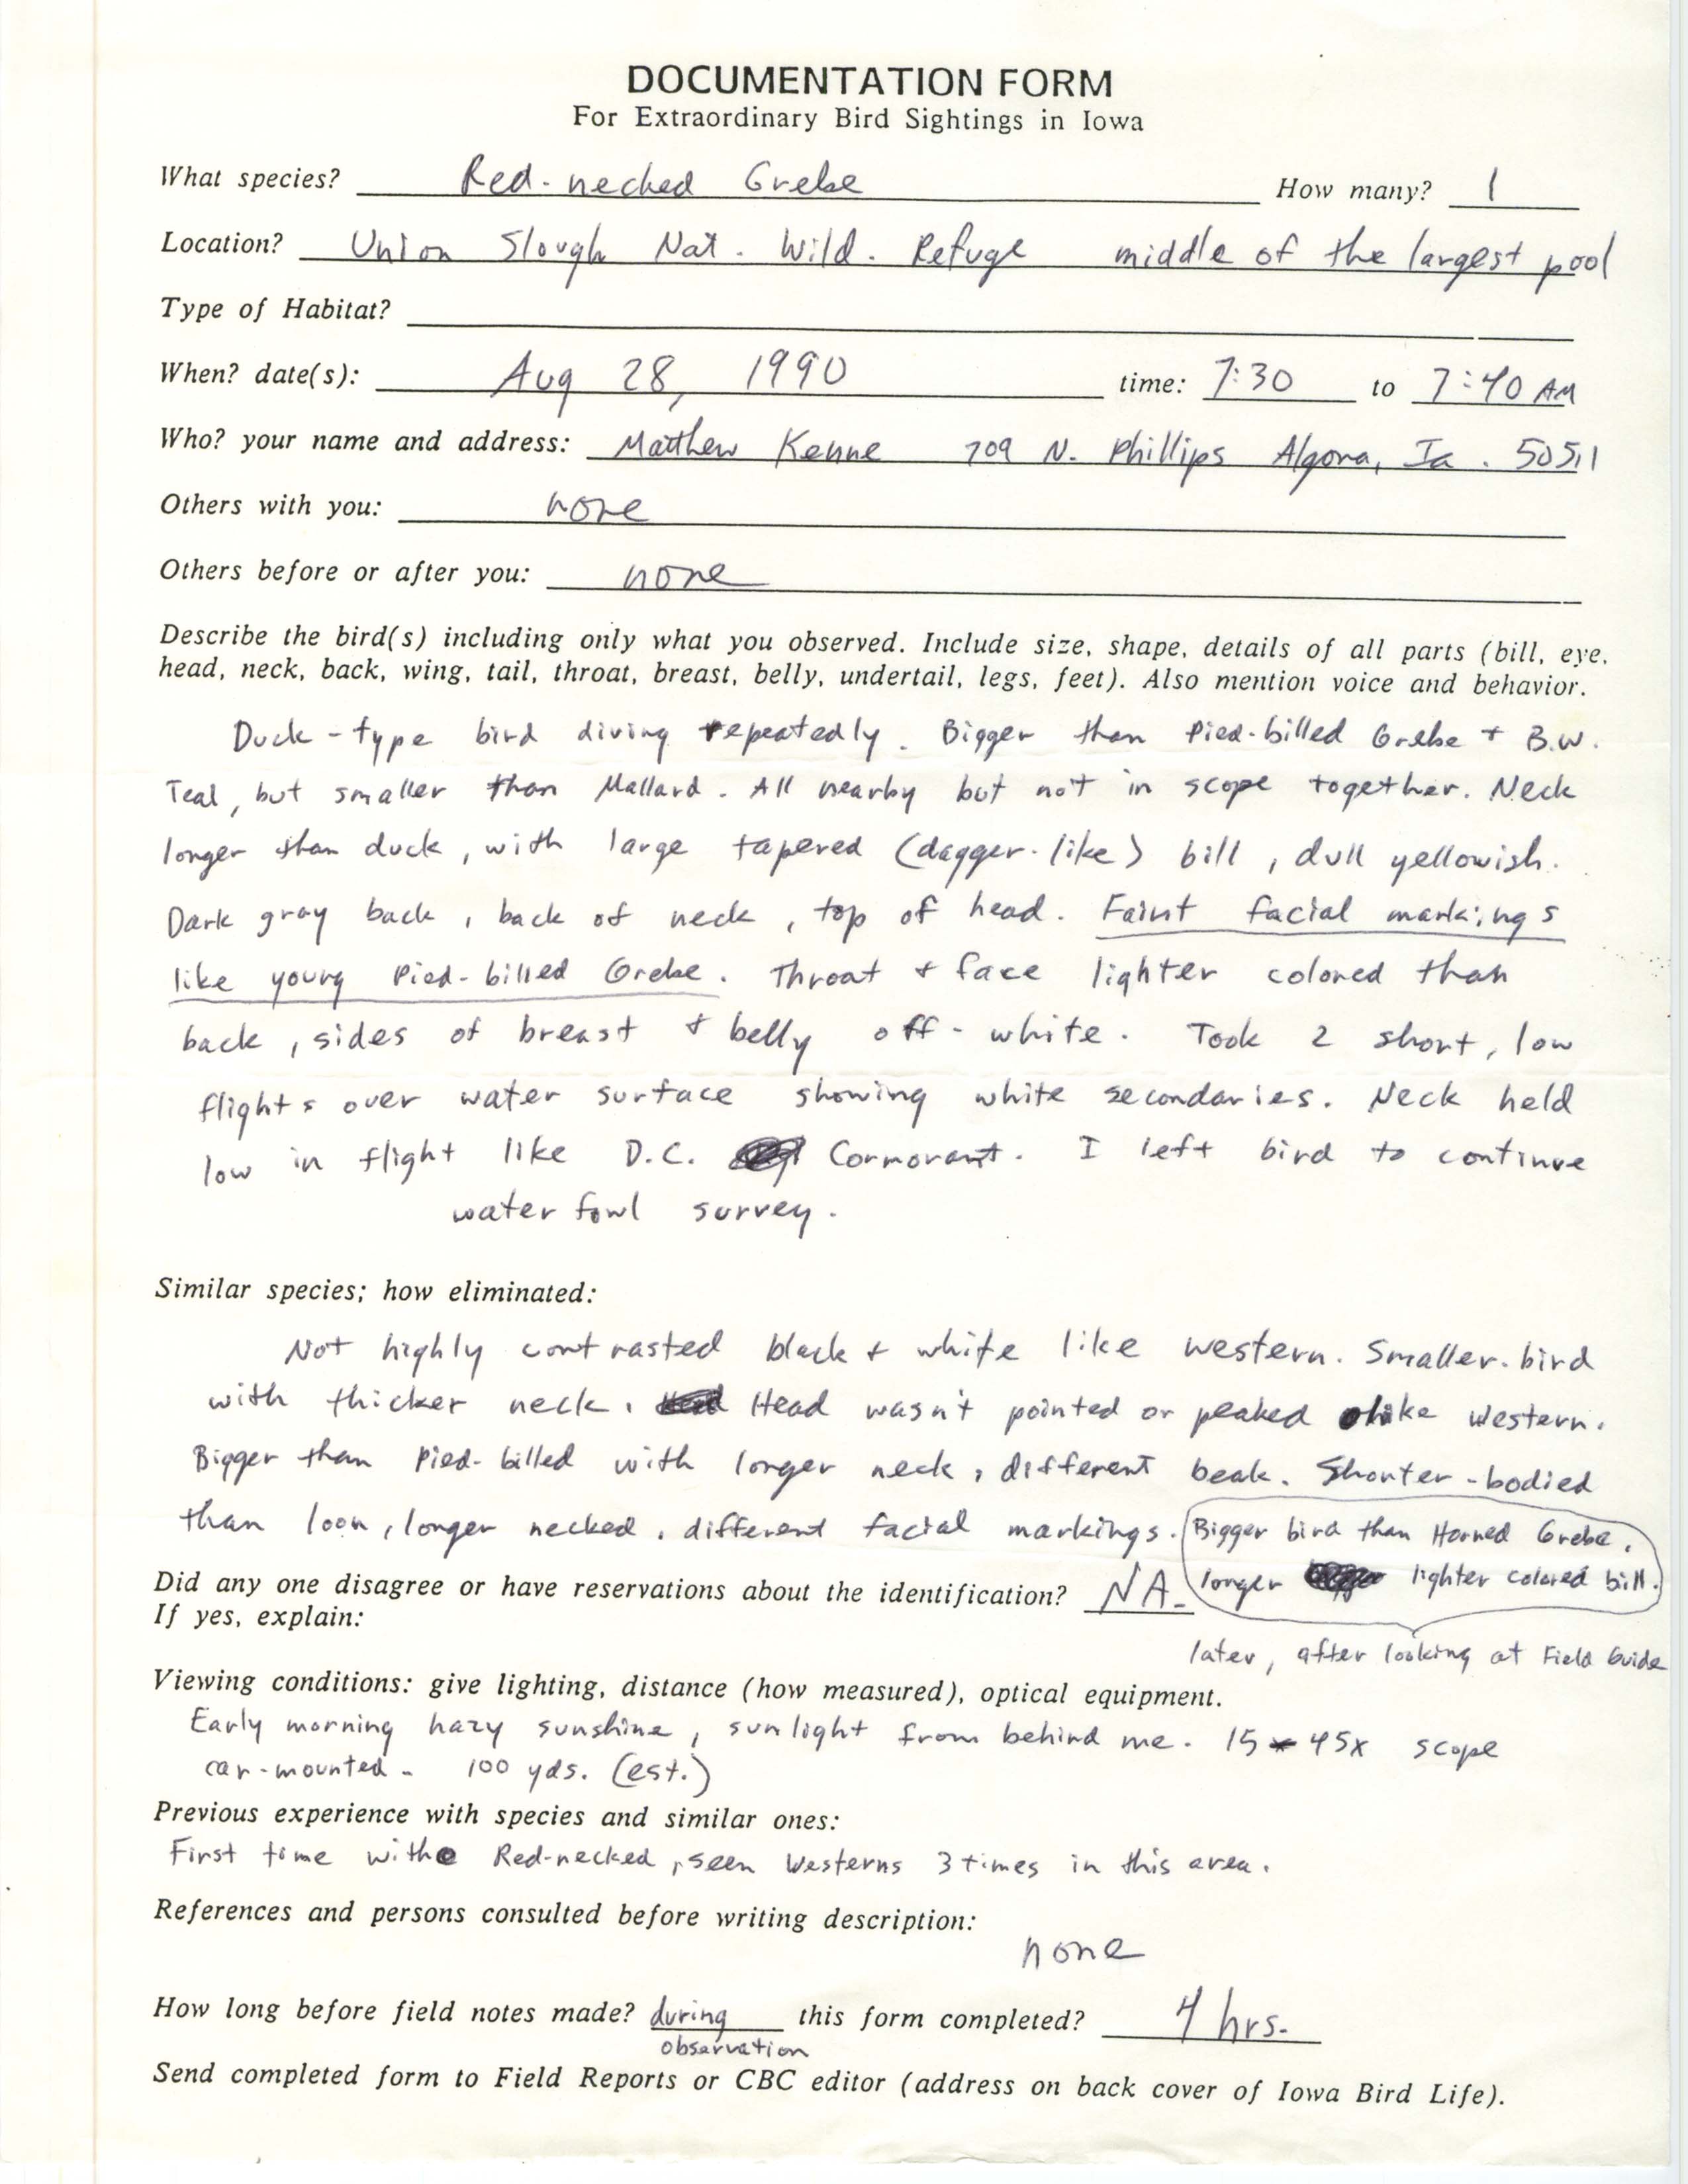 Rare bird documentation form for Red-necked Grebe at Union Slough National Wildlife Refuge, 1990